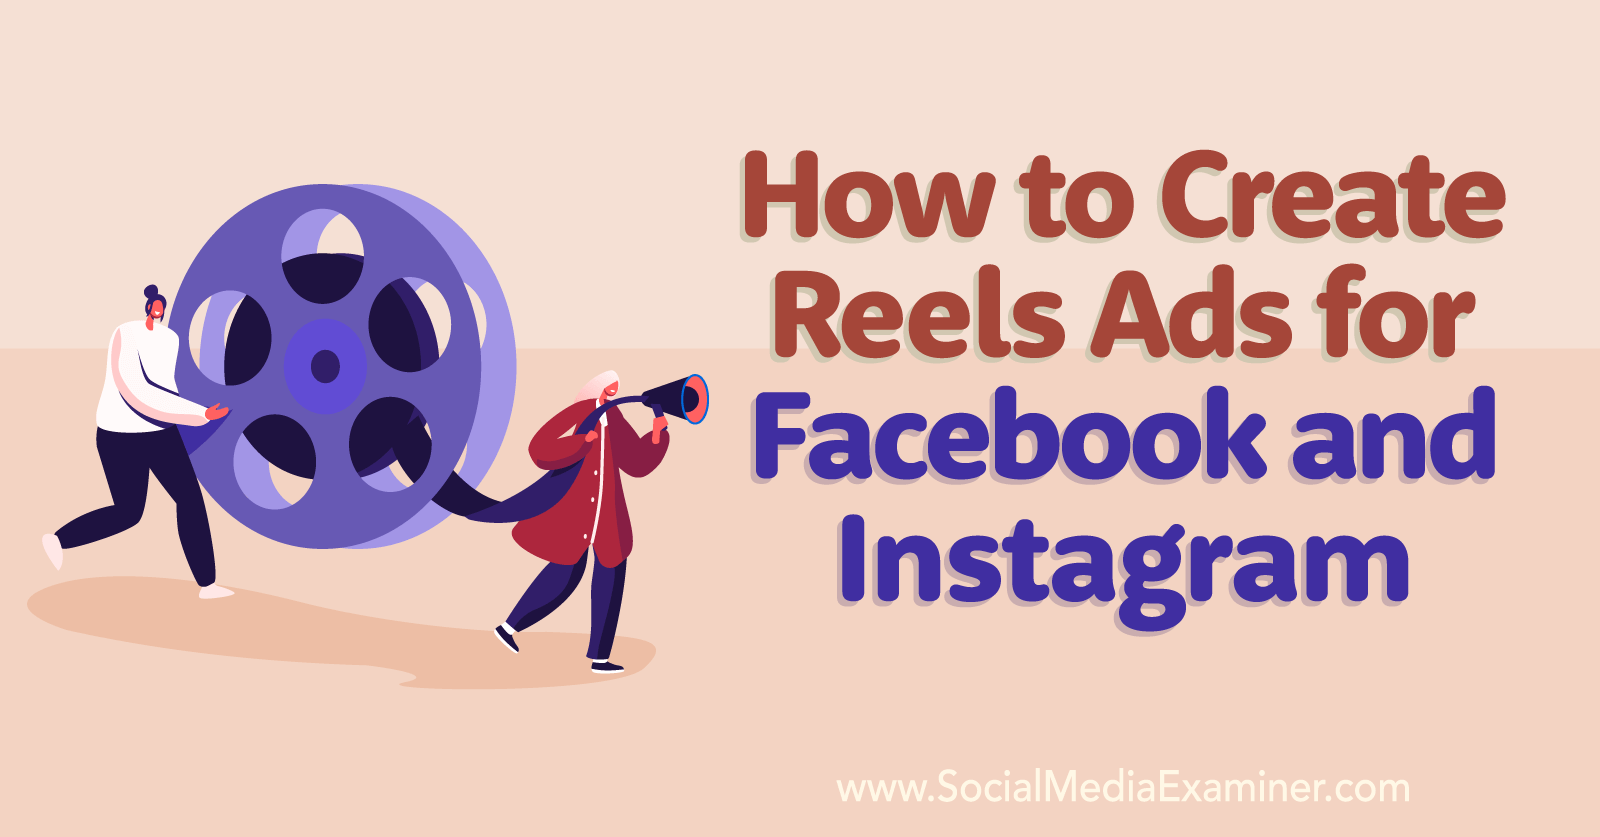 How to Create Reels Ads for Facebook and Instagram : Social Media